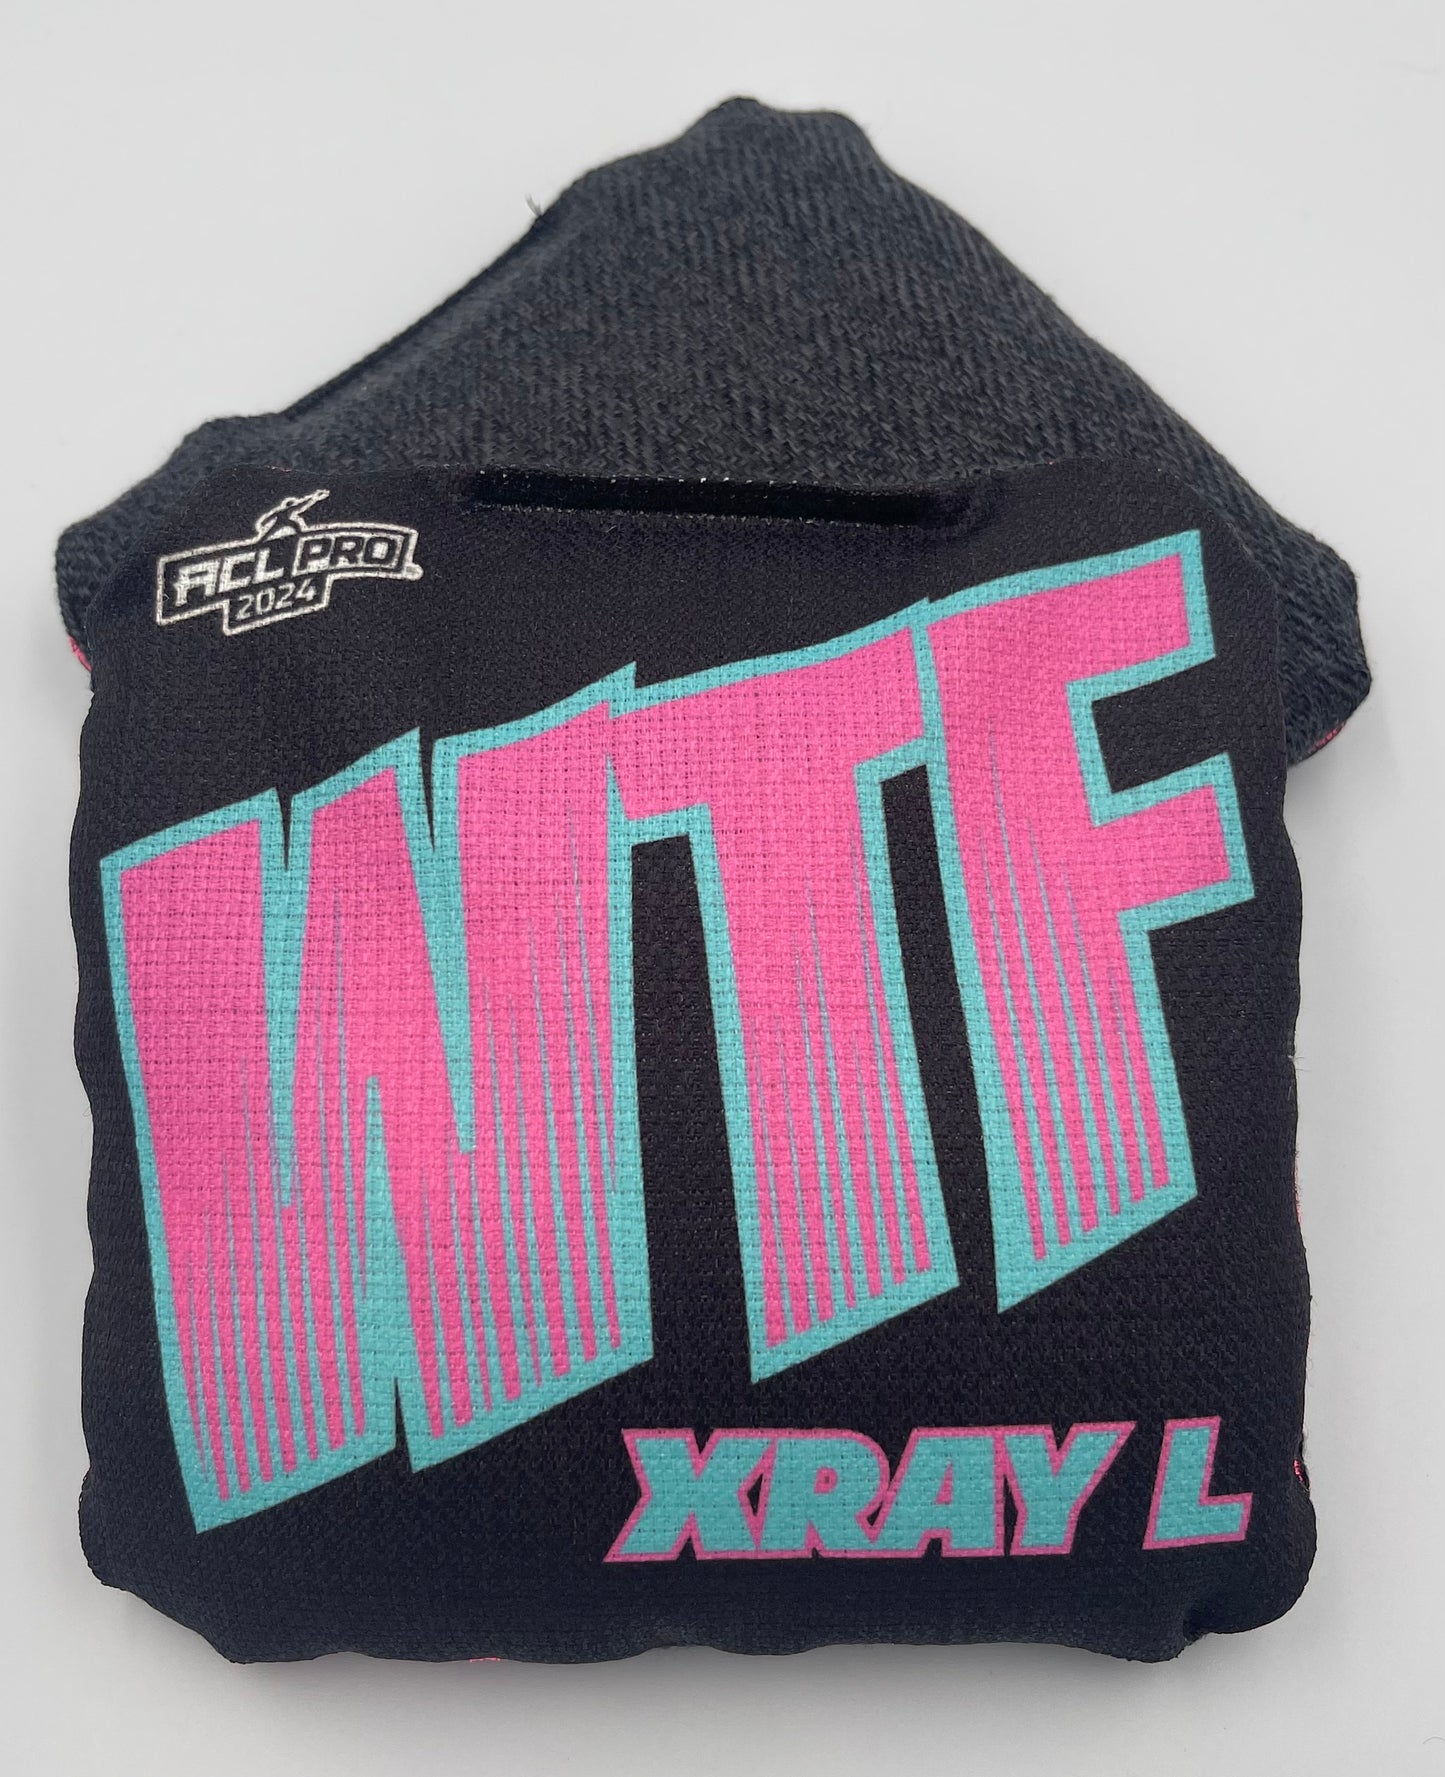 WTF X-RAY L - ACL Pro Stamped Cornhole Bags - Set of 4 bags